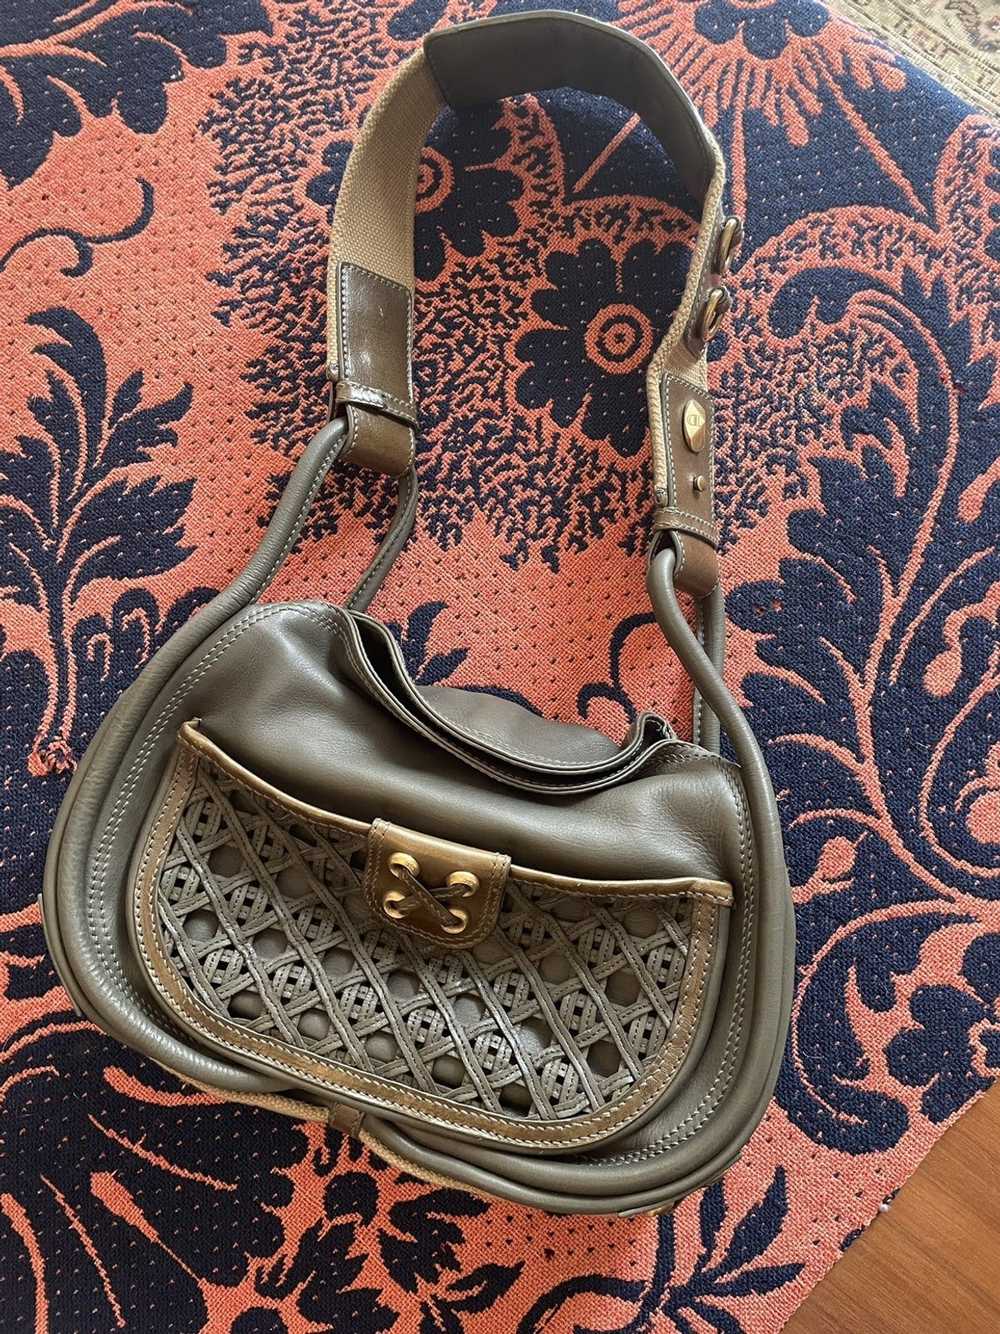 Dior One of a kind Galliano Dior lamb leather bag - image 1